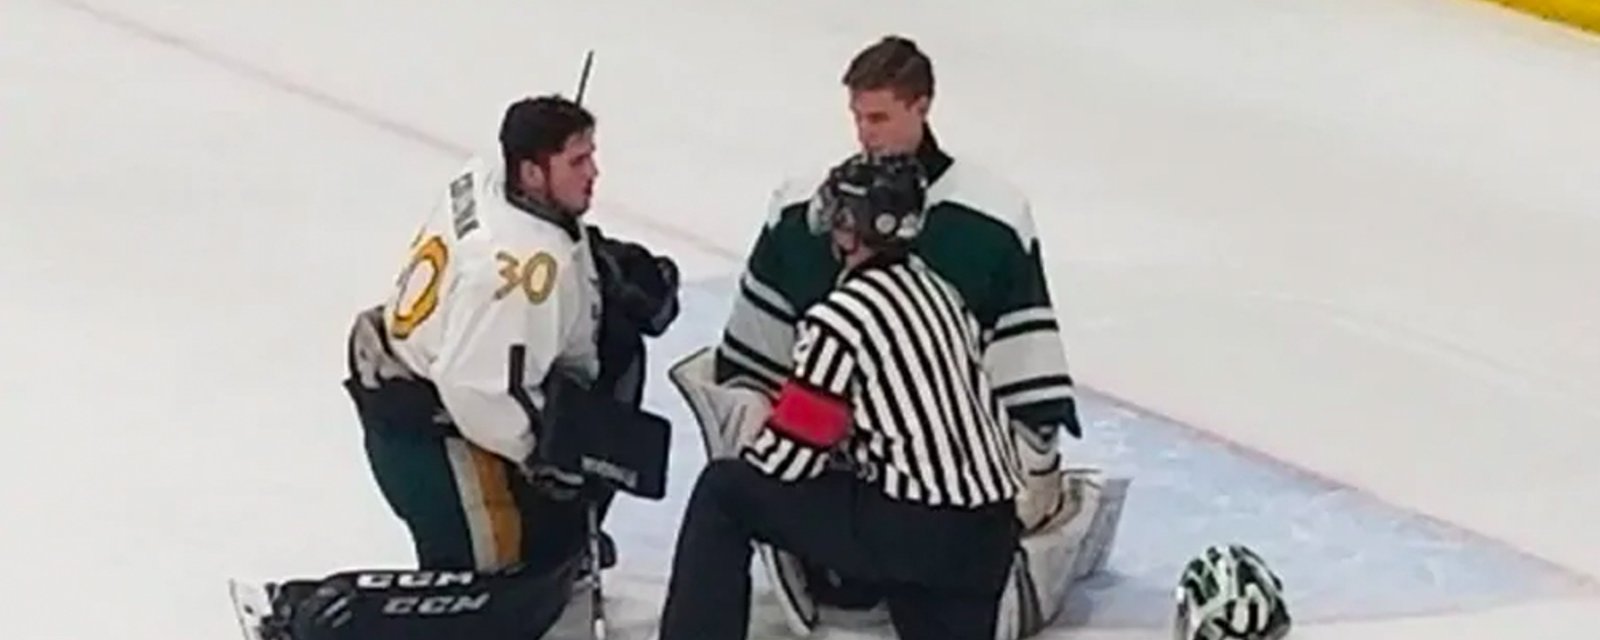 Classy move from opposing goalie warms hearts in high school hockey game